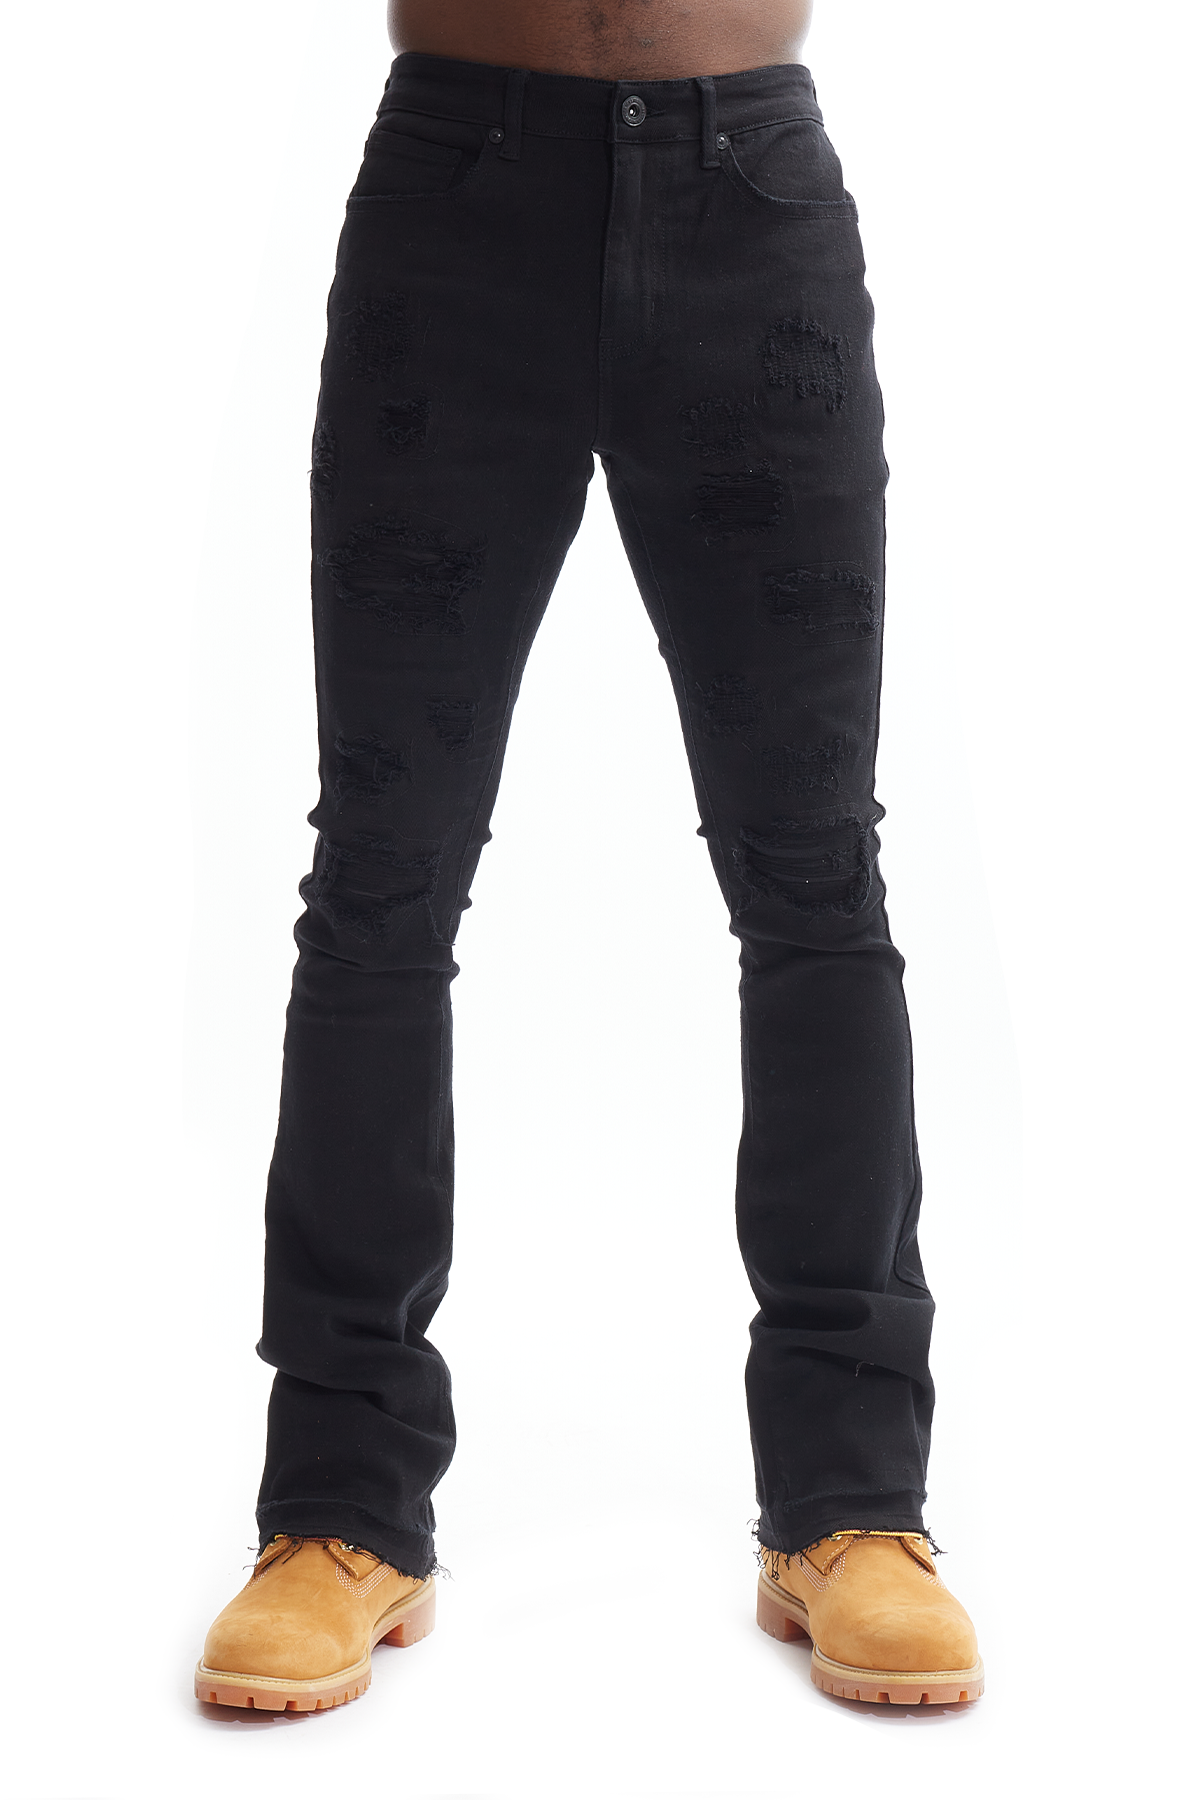 RIP-OFF / REPAIR STACKED FLARE FIT JEANS - DP22860-S